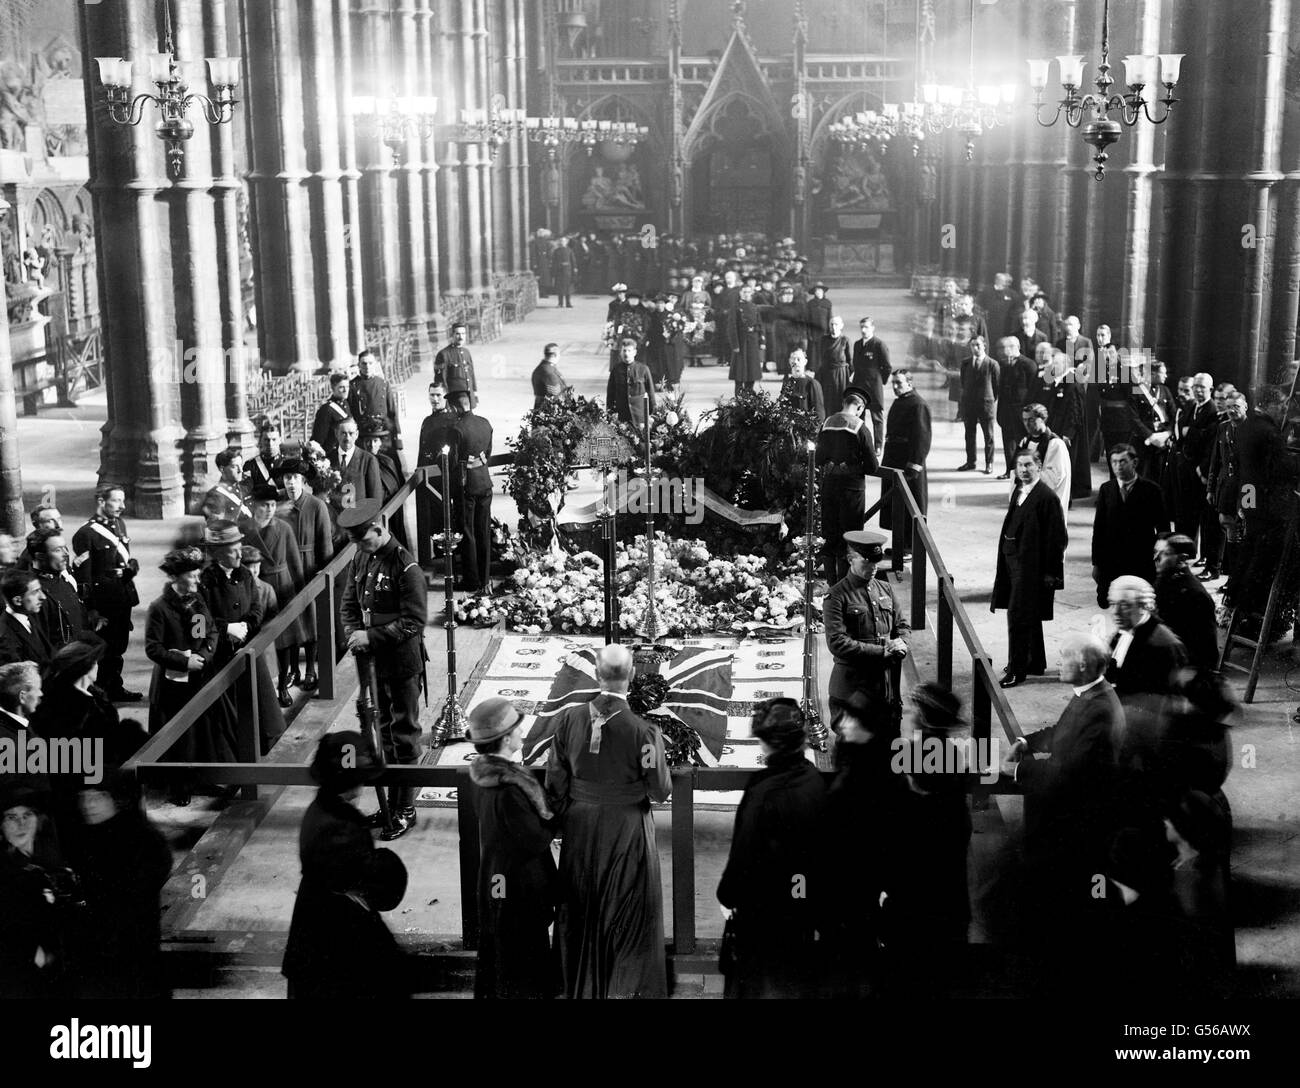 Landmarks - Burial of the Unknown Warrior - Westminster Abbey - 1920 Stock Photo